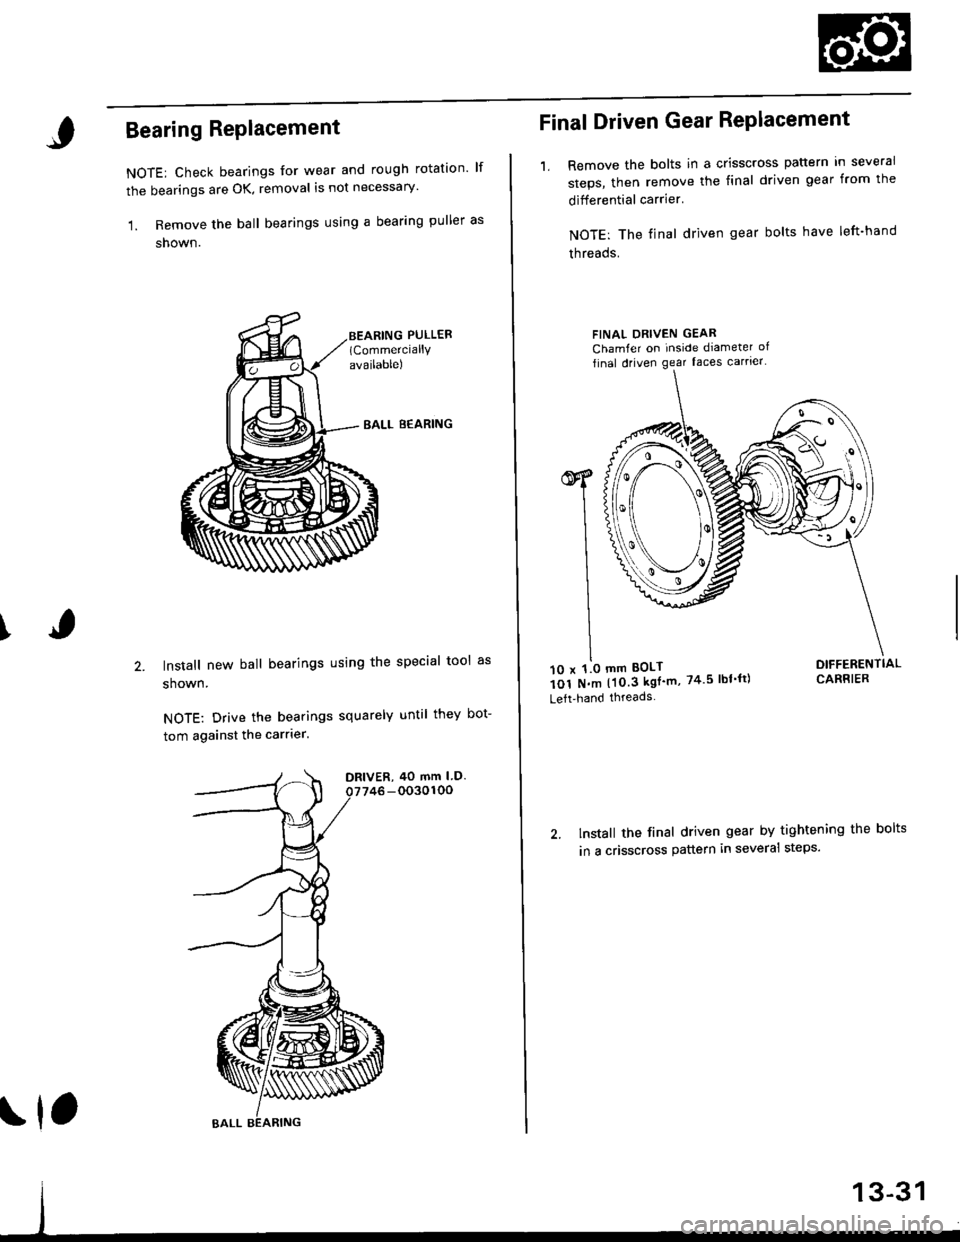 HONDA CIVIC 1996 6.G Workshop Manual I
Bearing RePlacement
NOTE: Check bearings for wear and rough rotation lf
the bearings are OK, removal is not necessary
1. Remove the ball bearings using a bearing puller as
shown.
EALL B€ARING
ln